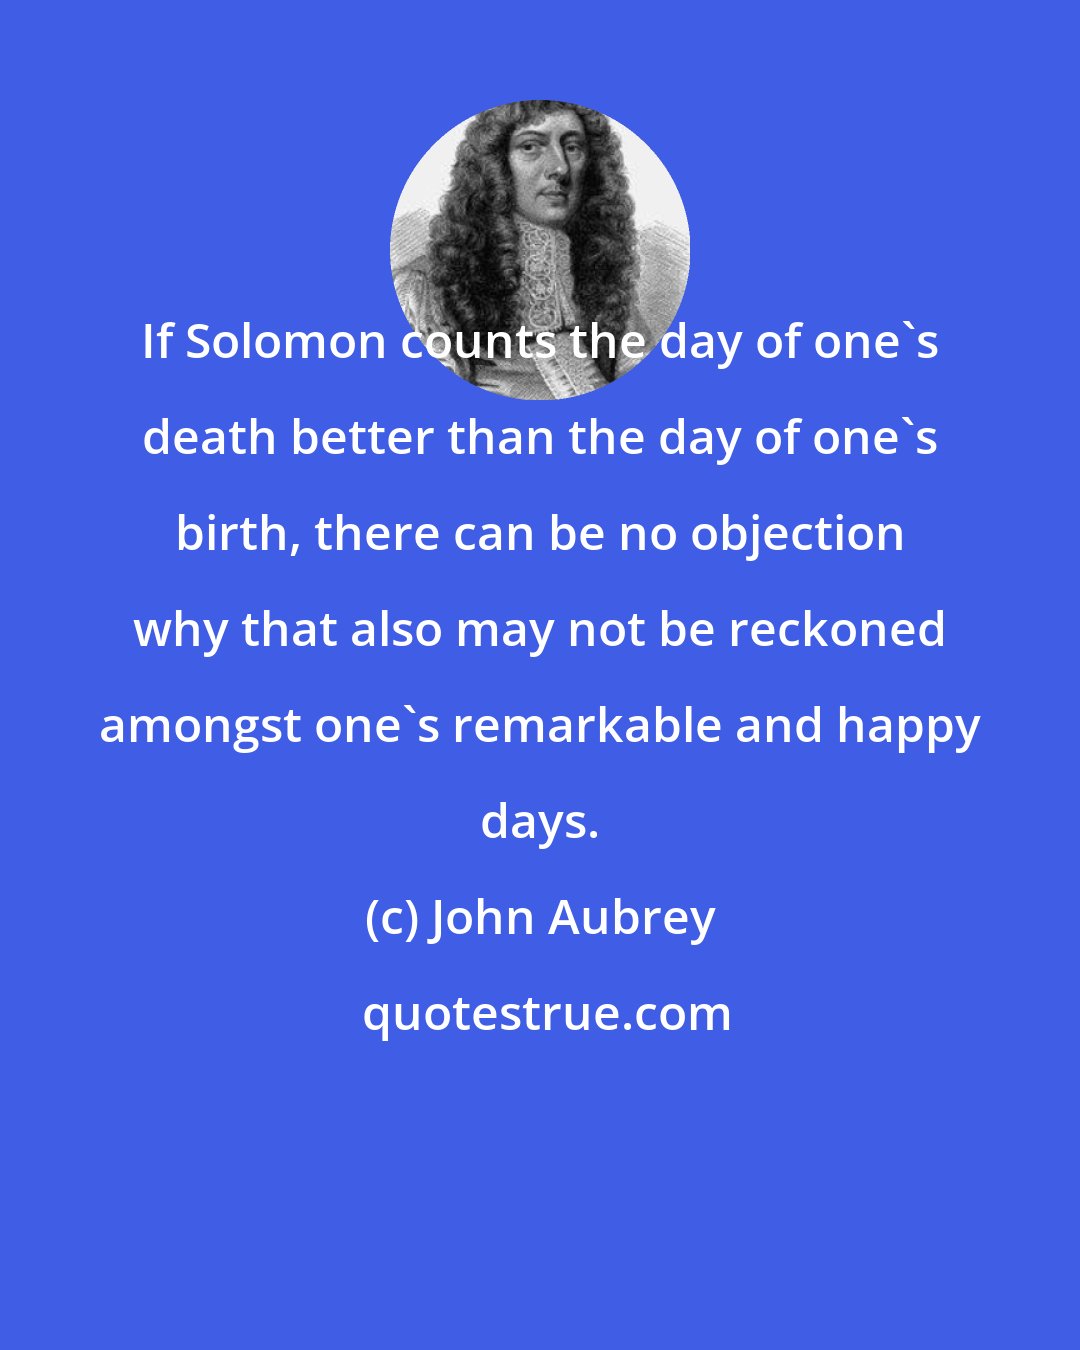 John Aubrey: If Solomon counts the day of one's death better than the day of one's birth, there can be no objection why that also may not be reckoned amongst one's remarkable and happy days.